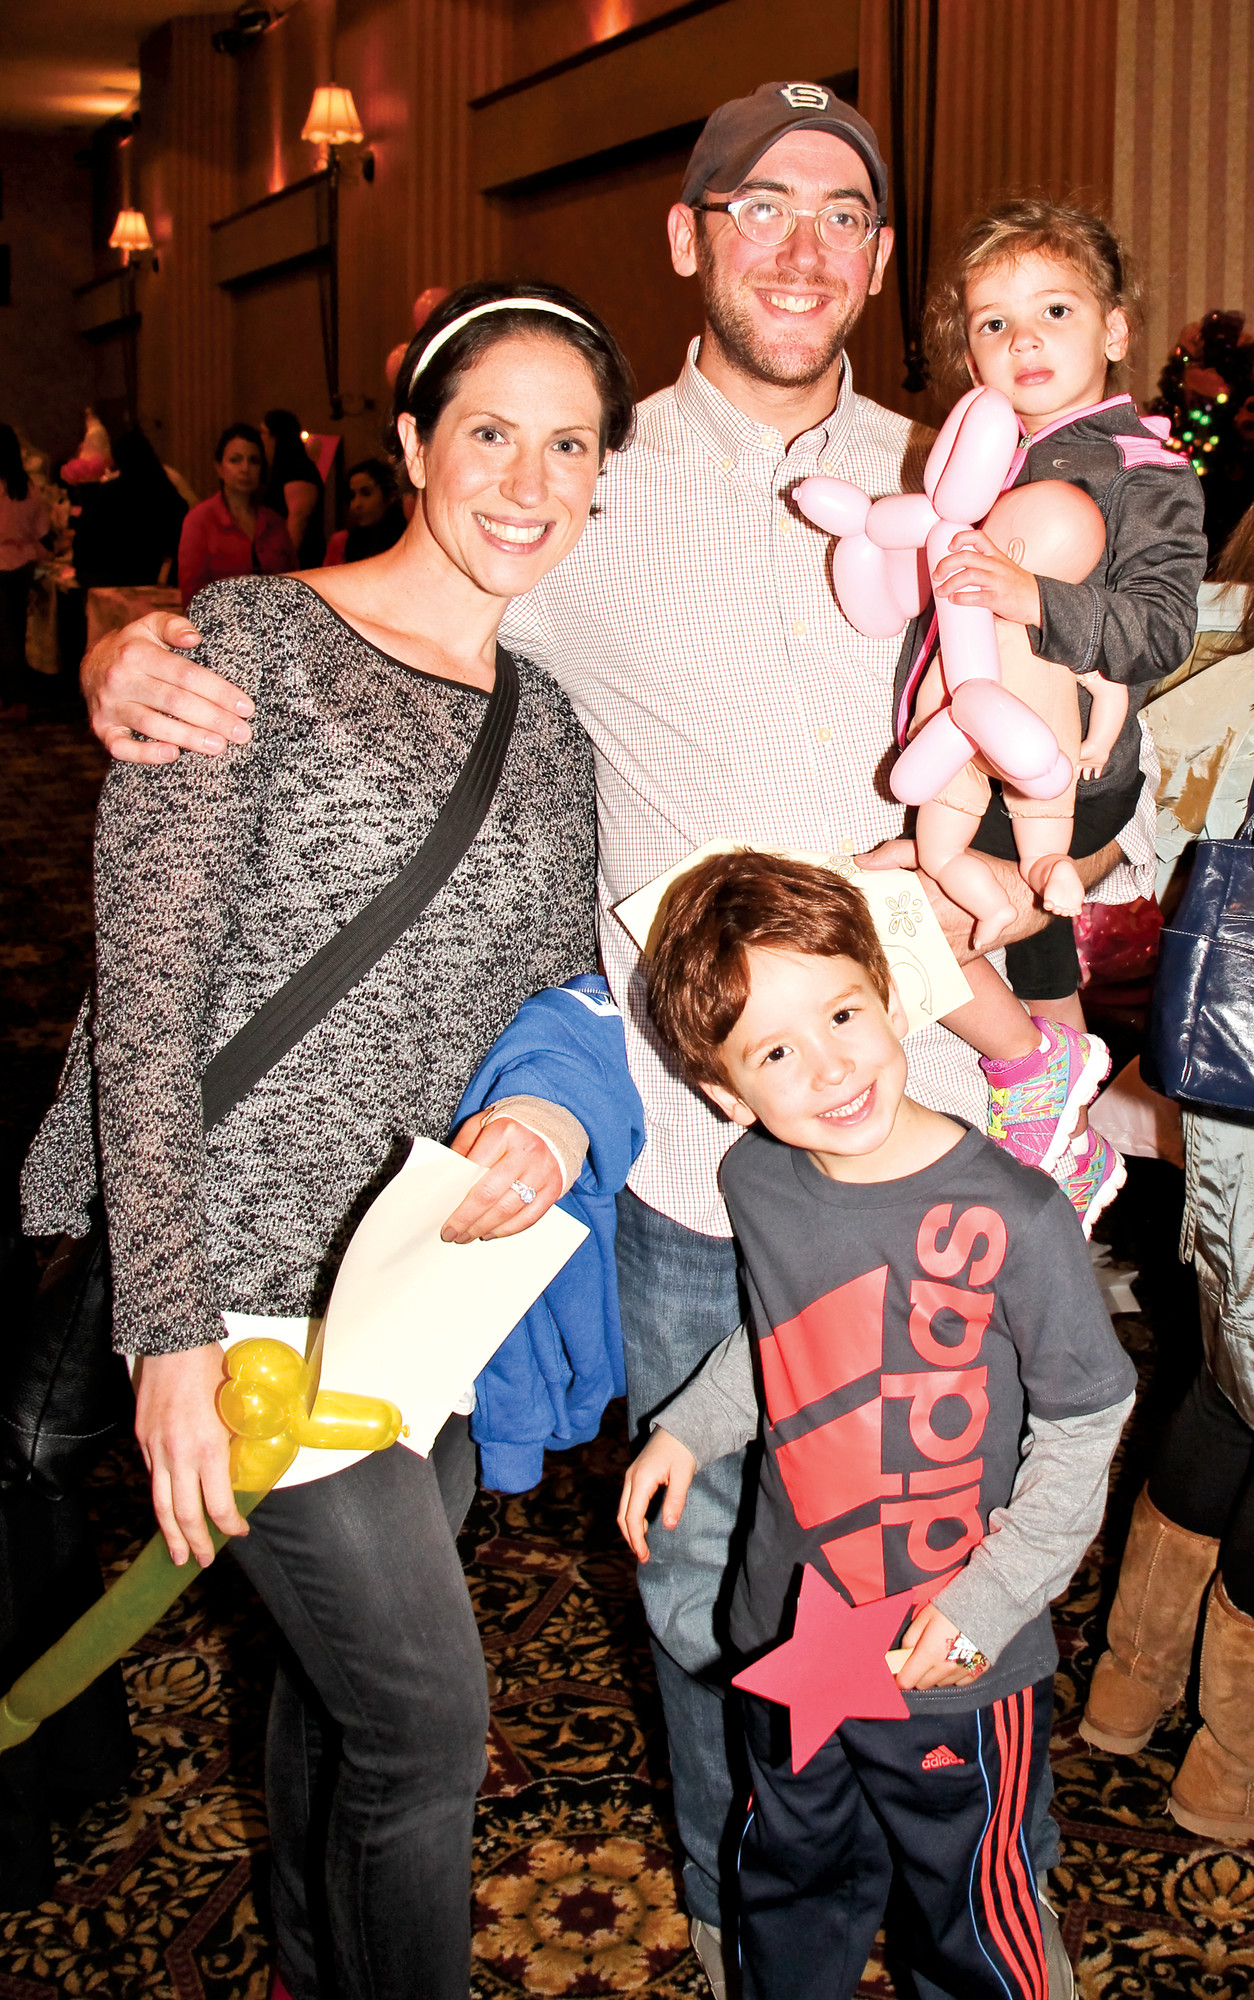 Michelle Mandel, a two-year breast cancer survivor, attended the event with her husband, Aaron, and children, Farrah, 2, and Jack, 5.